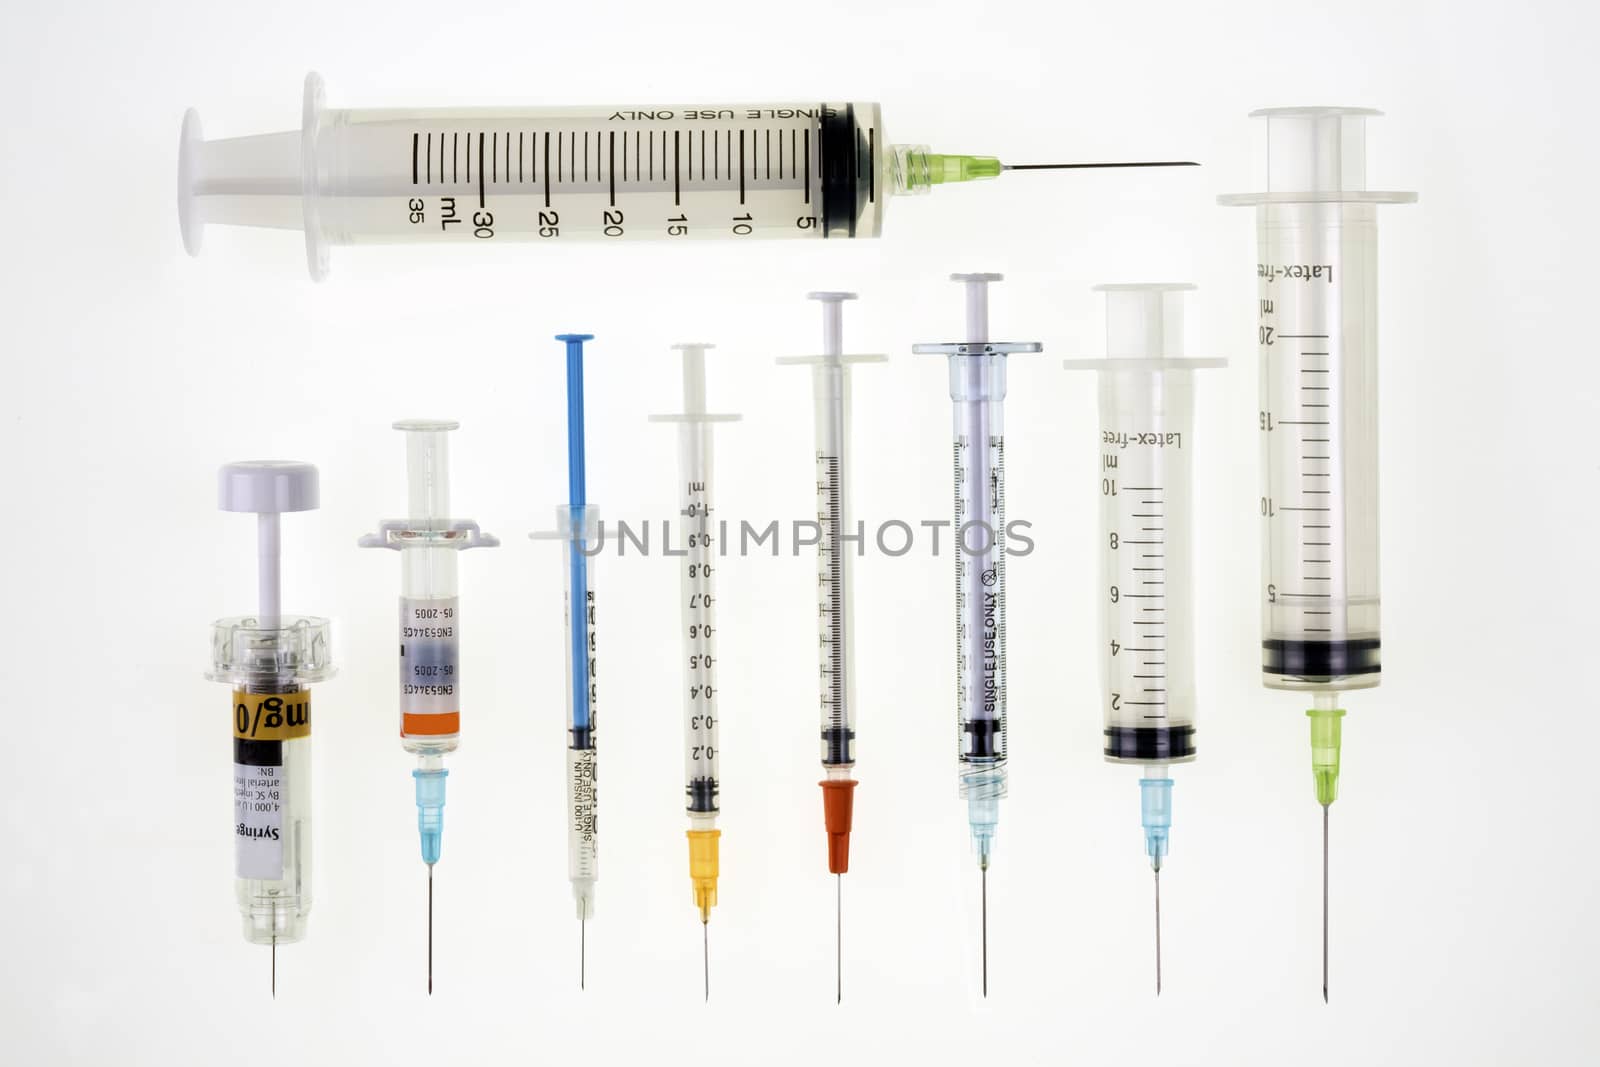 A selection of syringes and hypodermic needles used in medicine to give injections